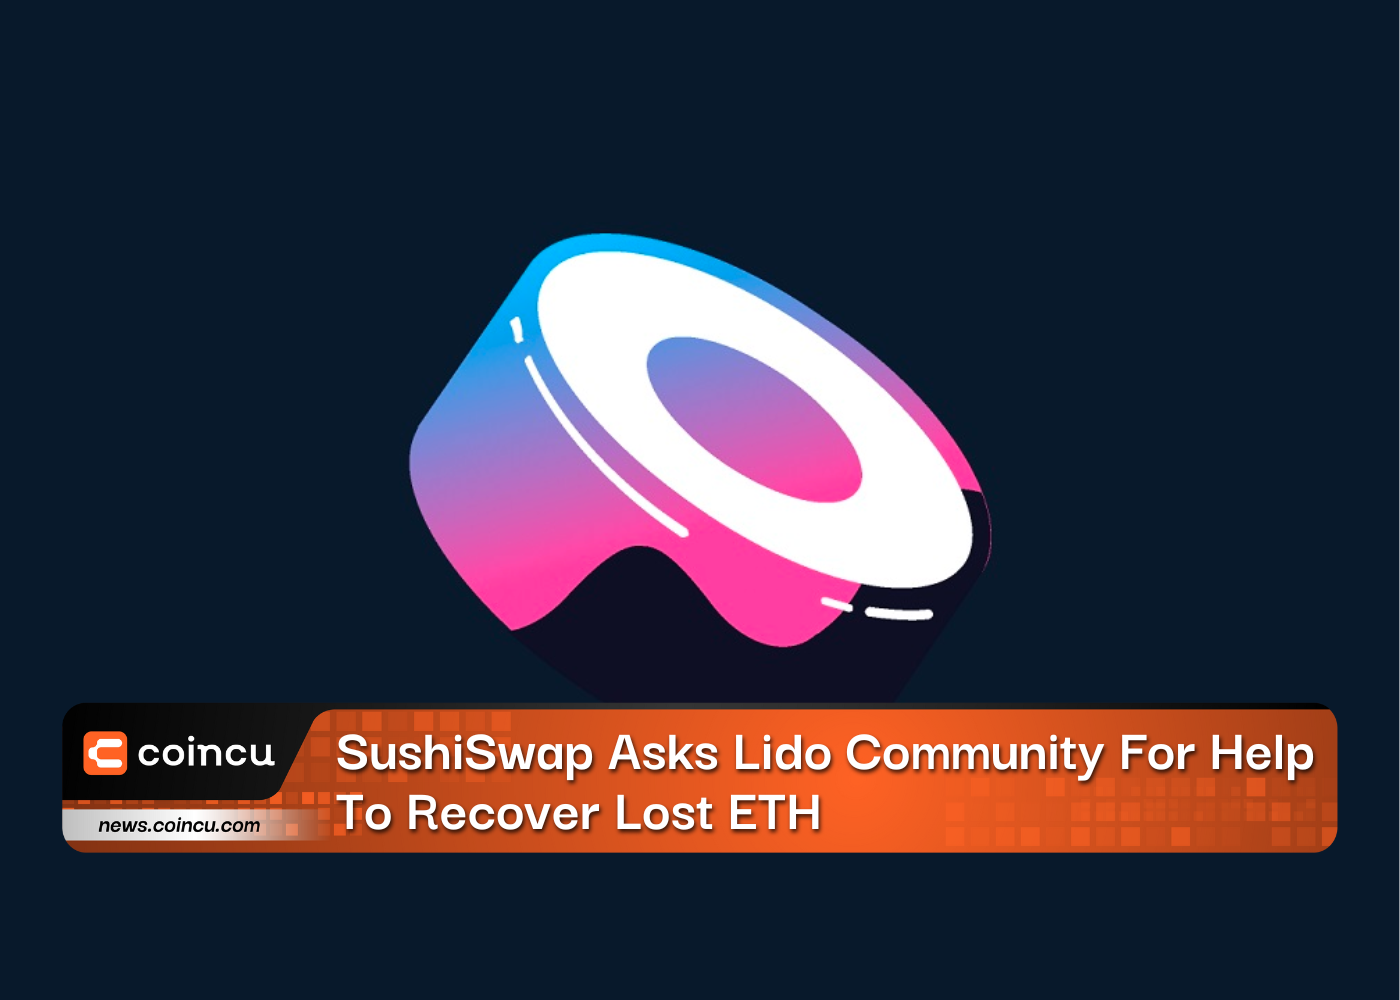 SushiSwap Asks Lido Community For Help To Recover Lost ETH